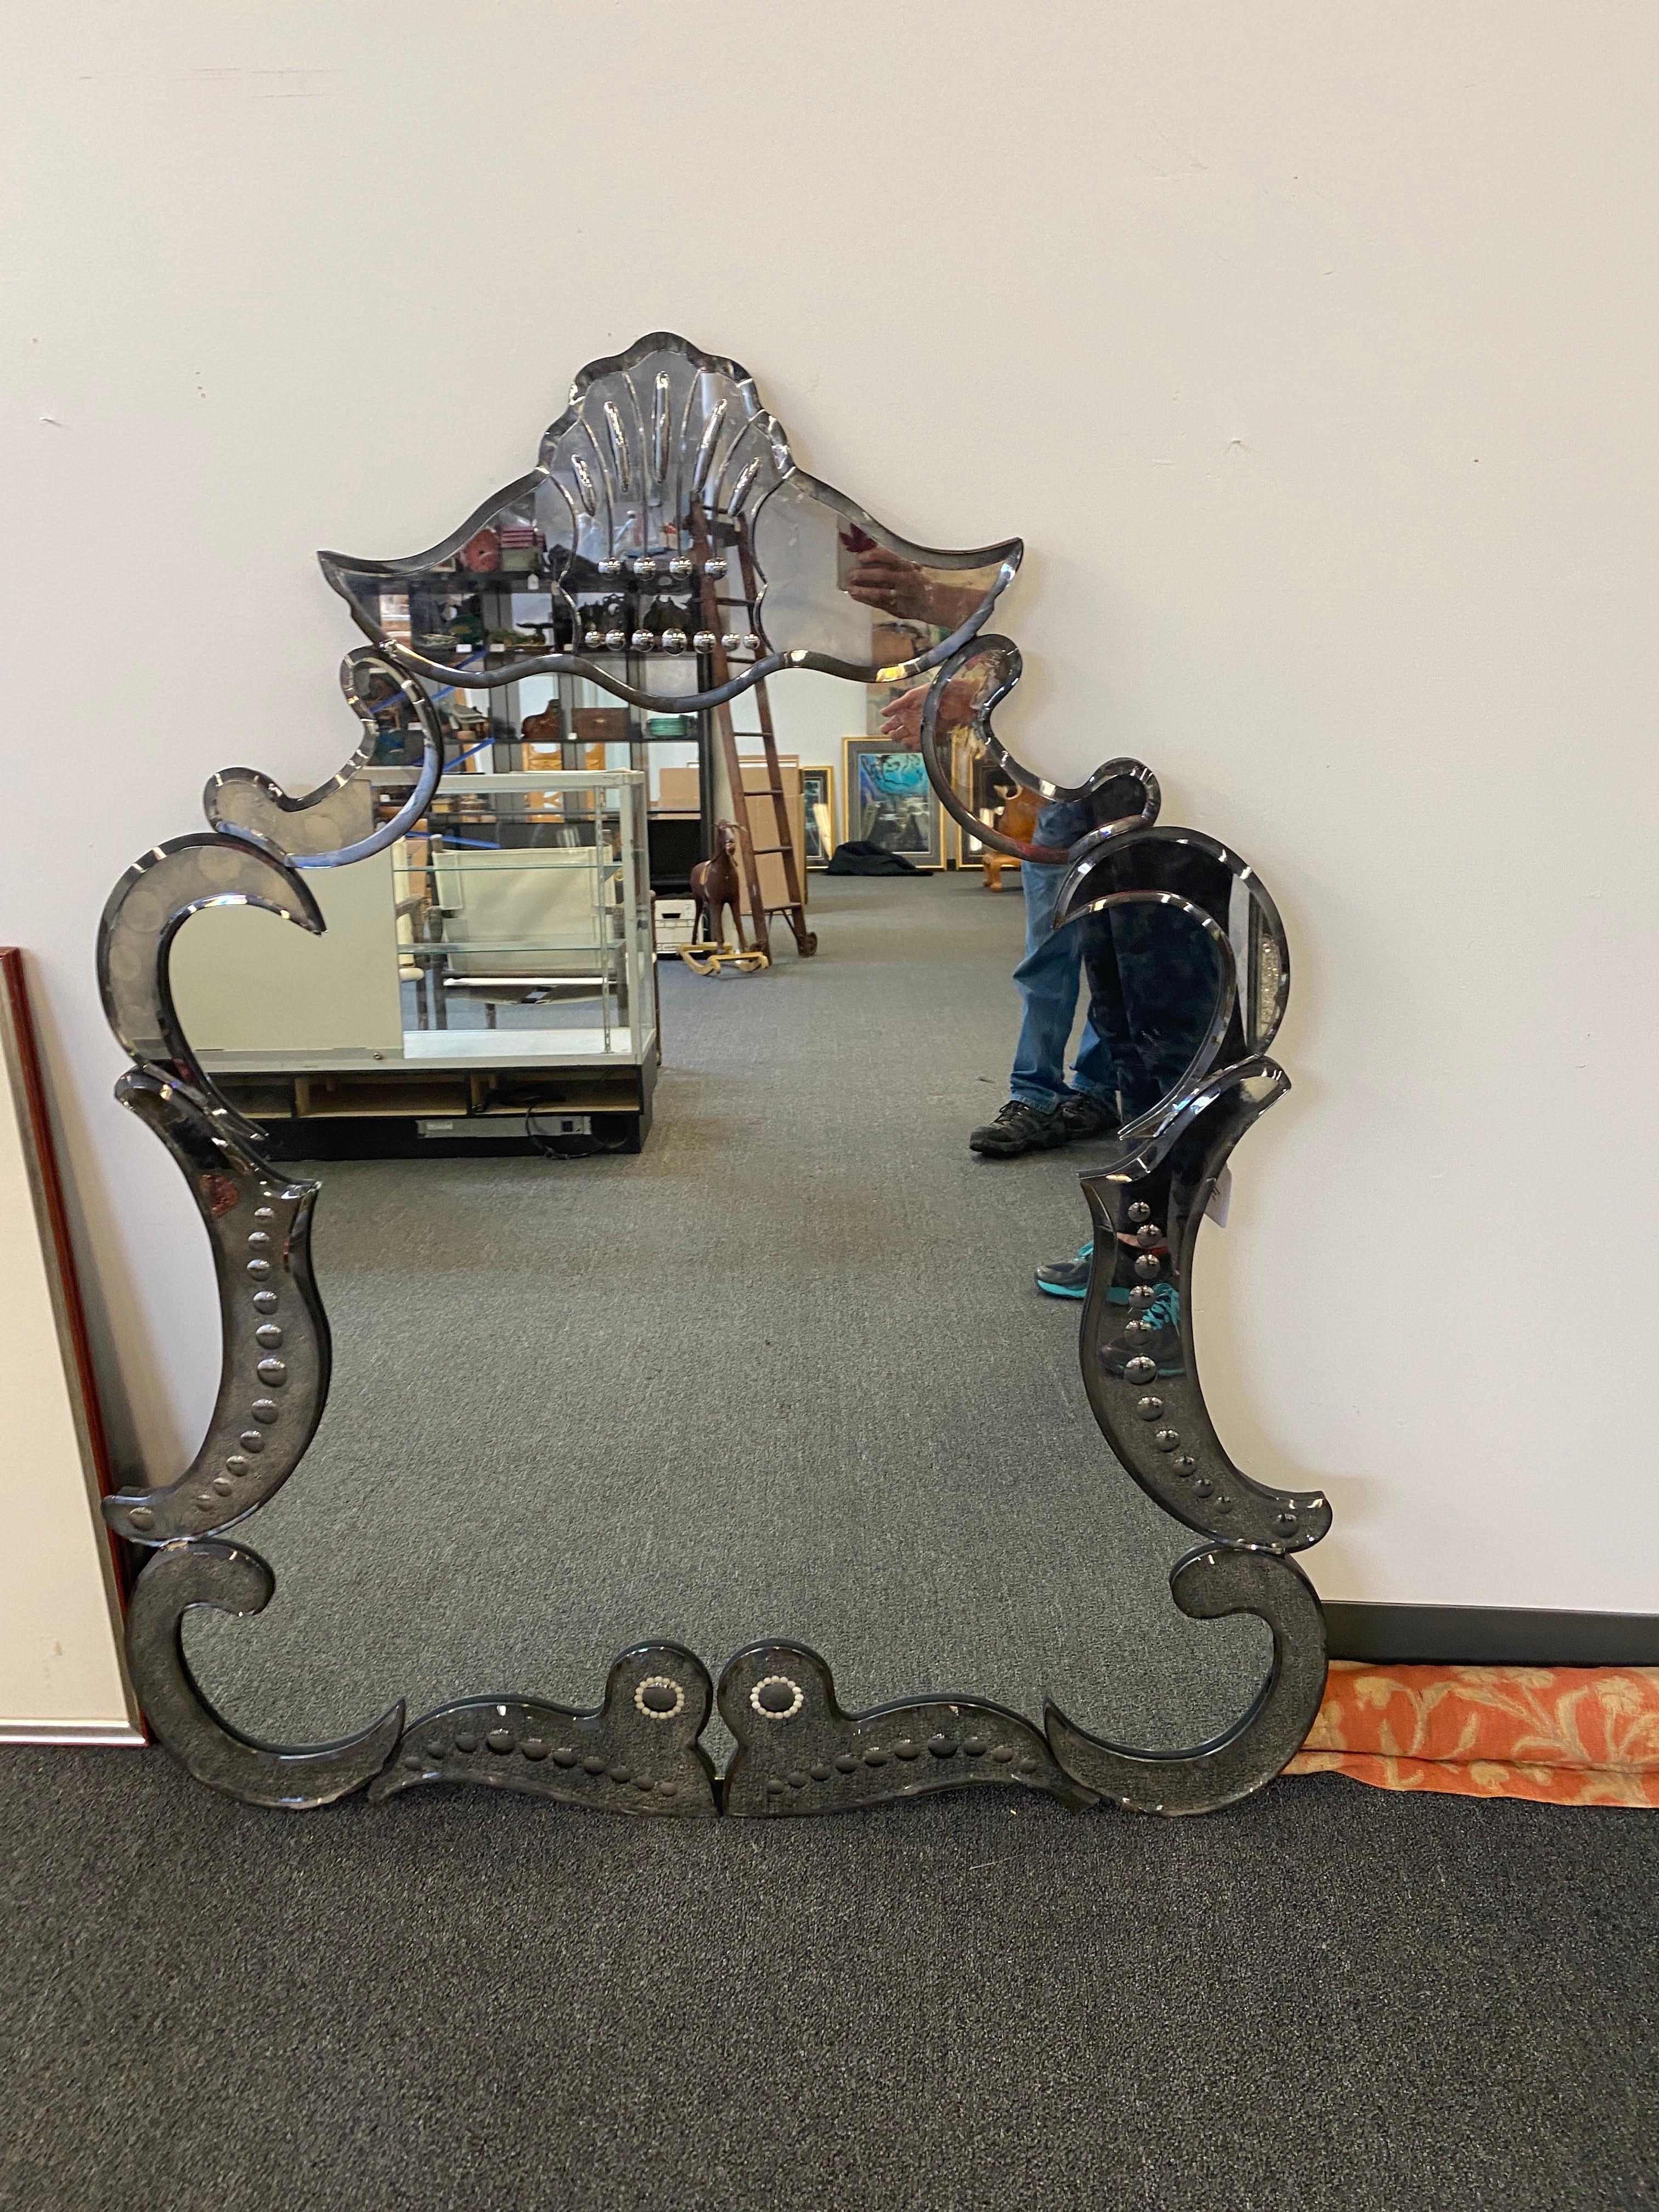 Large Vintage Venetian Etched Glass Mirror from early to mid 20th c. Minor chips to glass on side, hardly visible when hanging due to mottled natural of antique mirror glass and etched glass details.

Dimensions
52